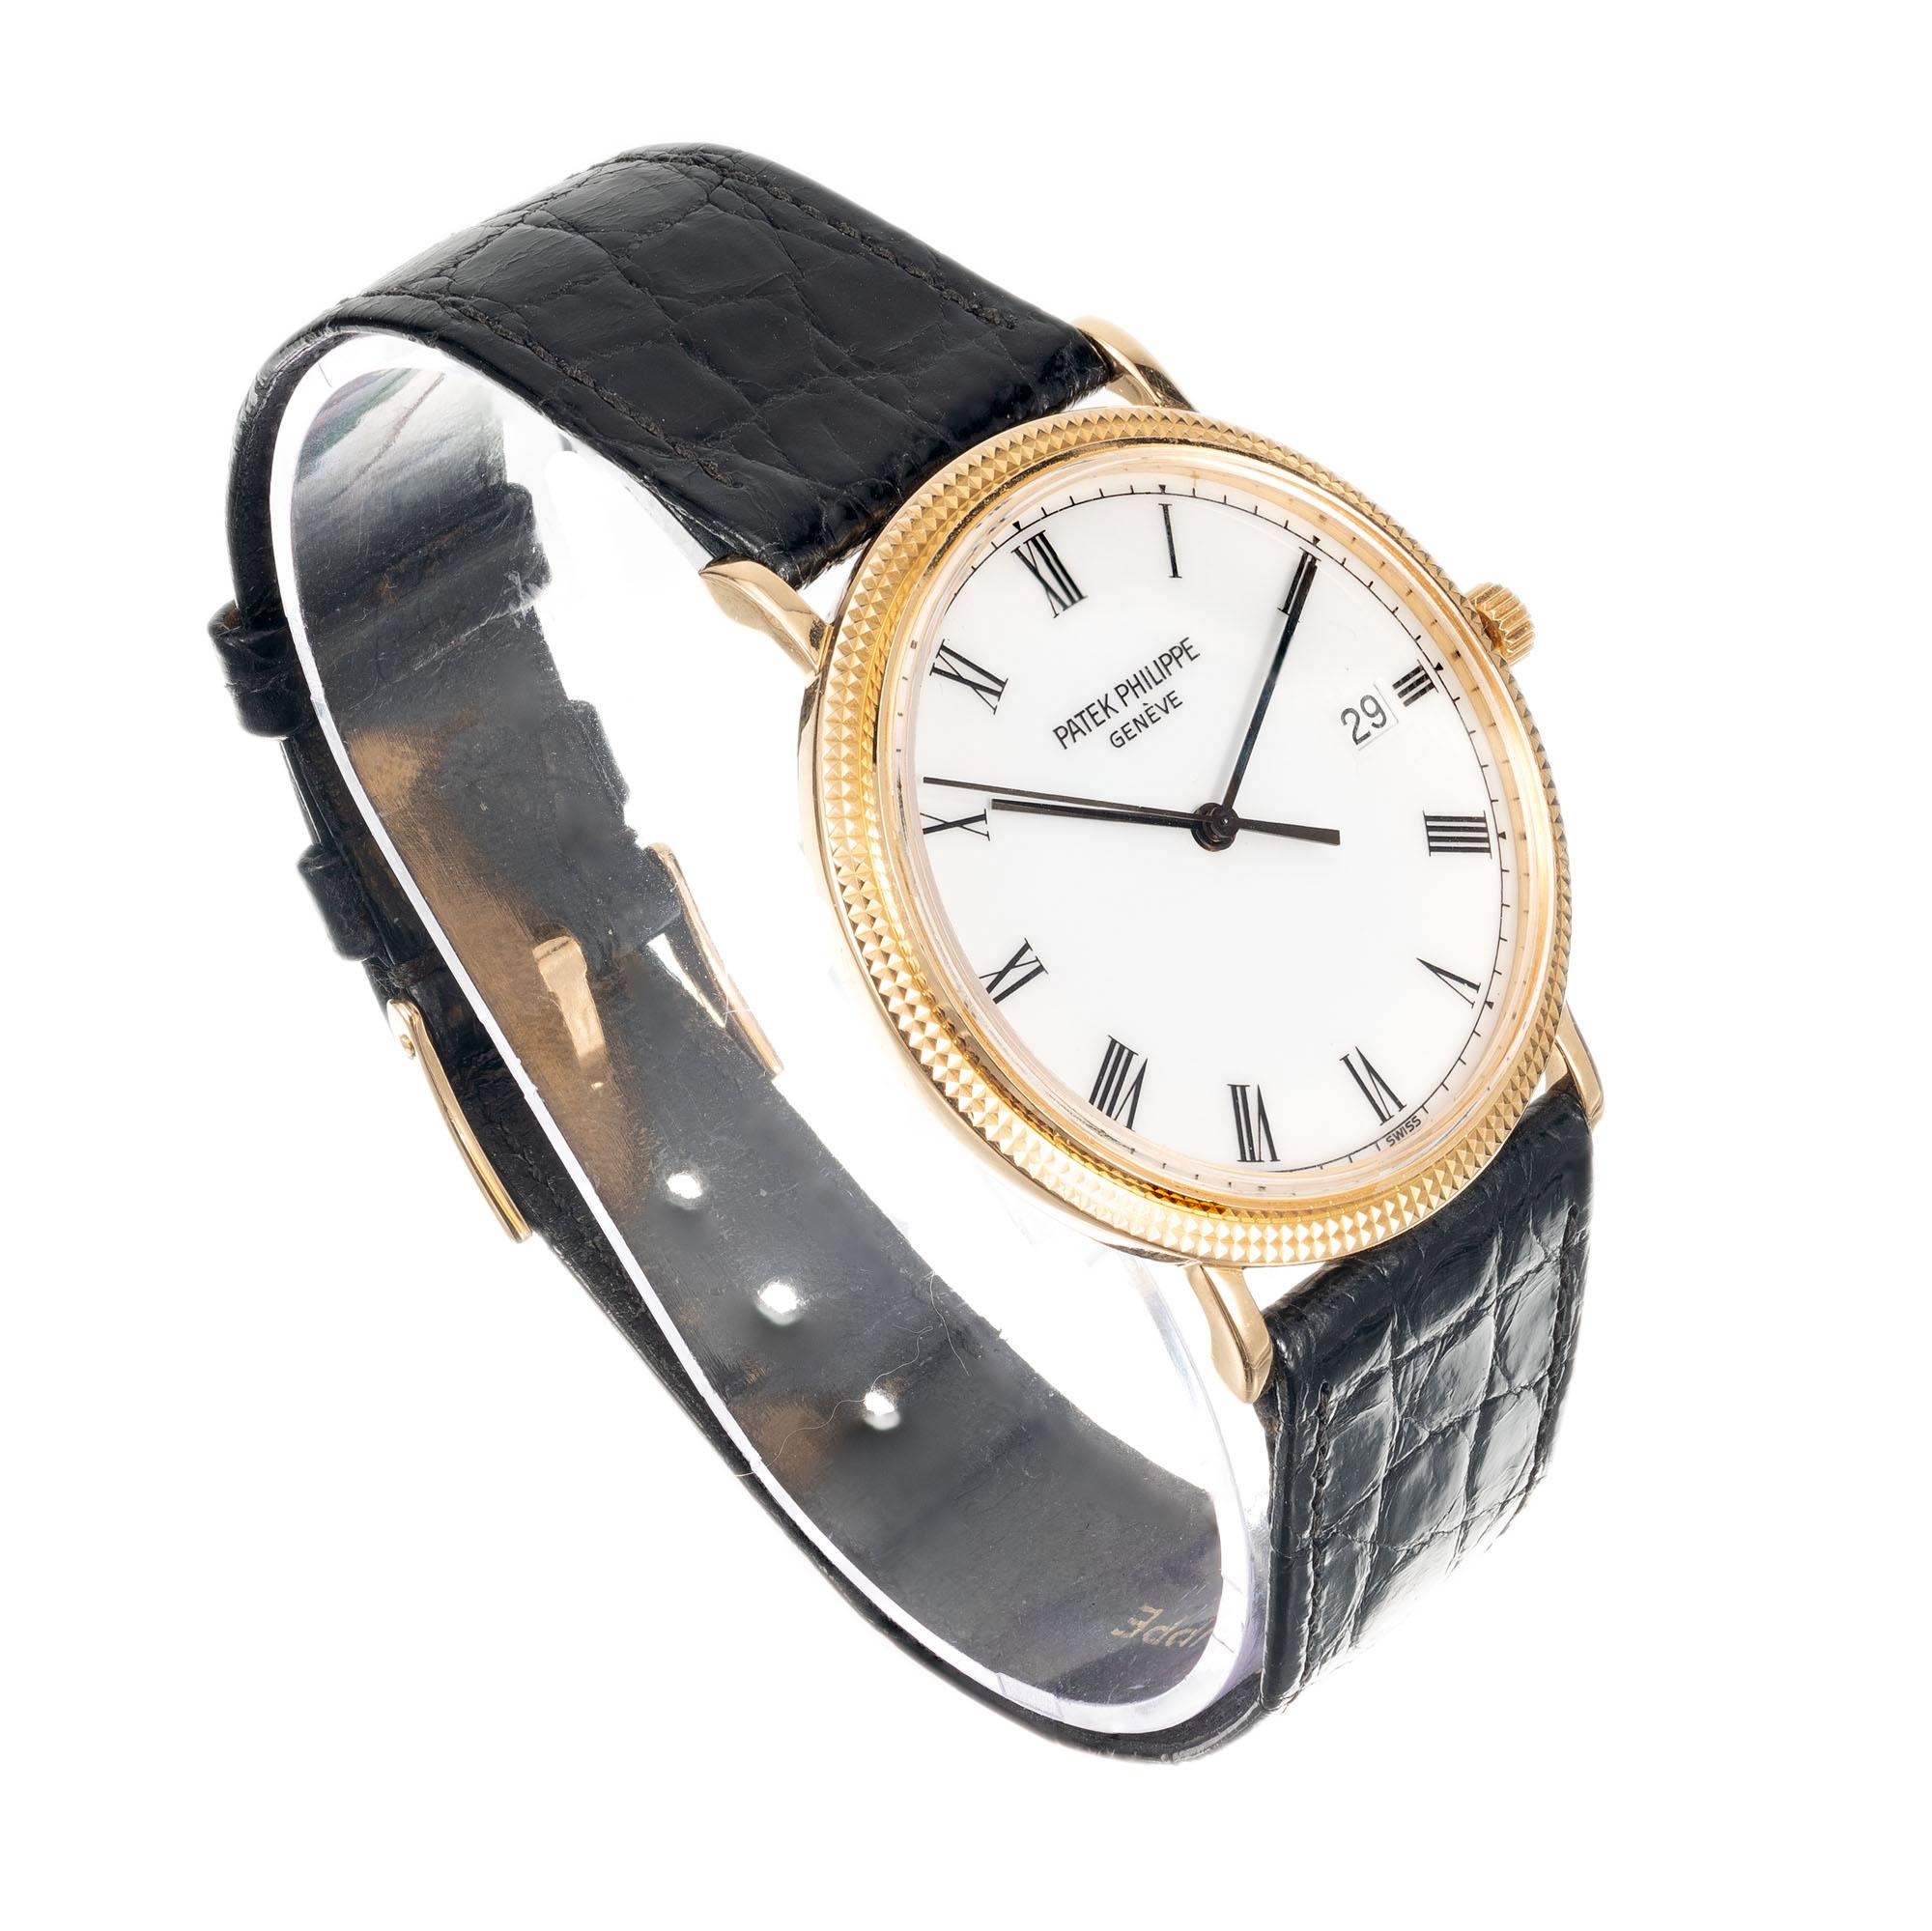 Patek Philipe 3944 hobnail Calatrava wristwatch in 18k solid yellow gold with 18k Patek buckle and black Patek Philippe band. White Patek dial with Roman numerals, date at 3 o’clock. Center sweep second hand.

Length: 37.29mm
Width: 33.33mm
Band